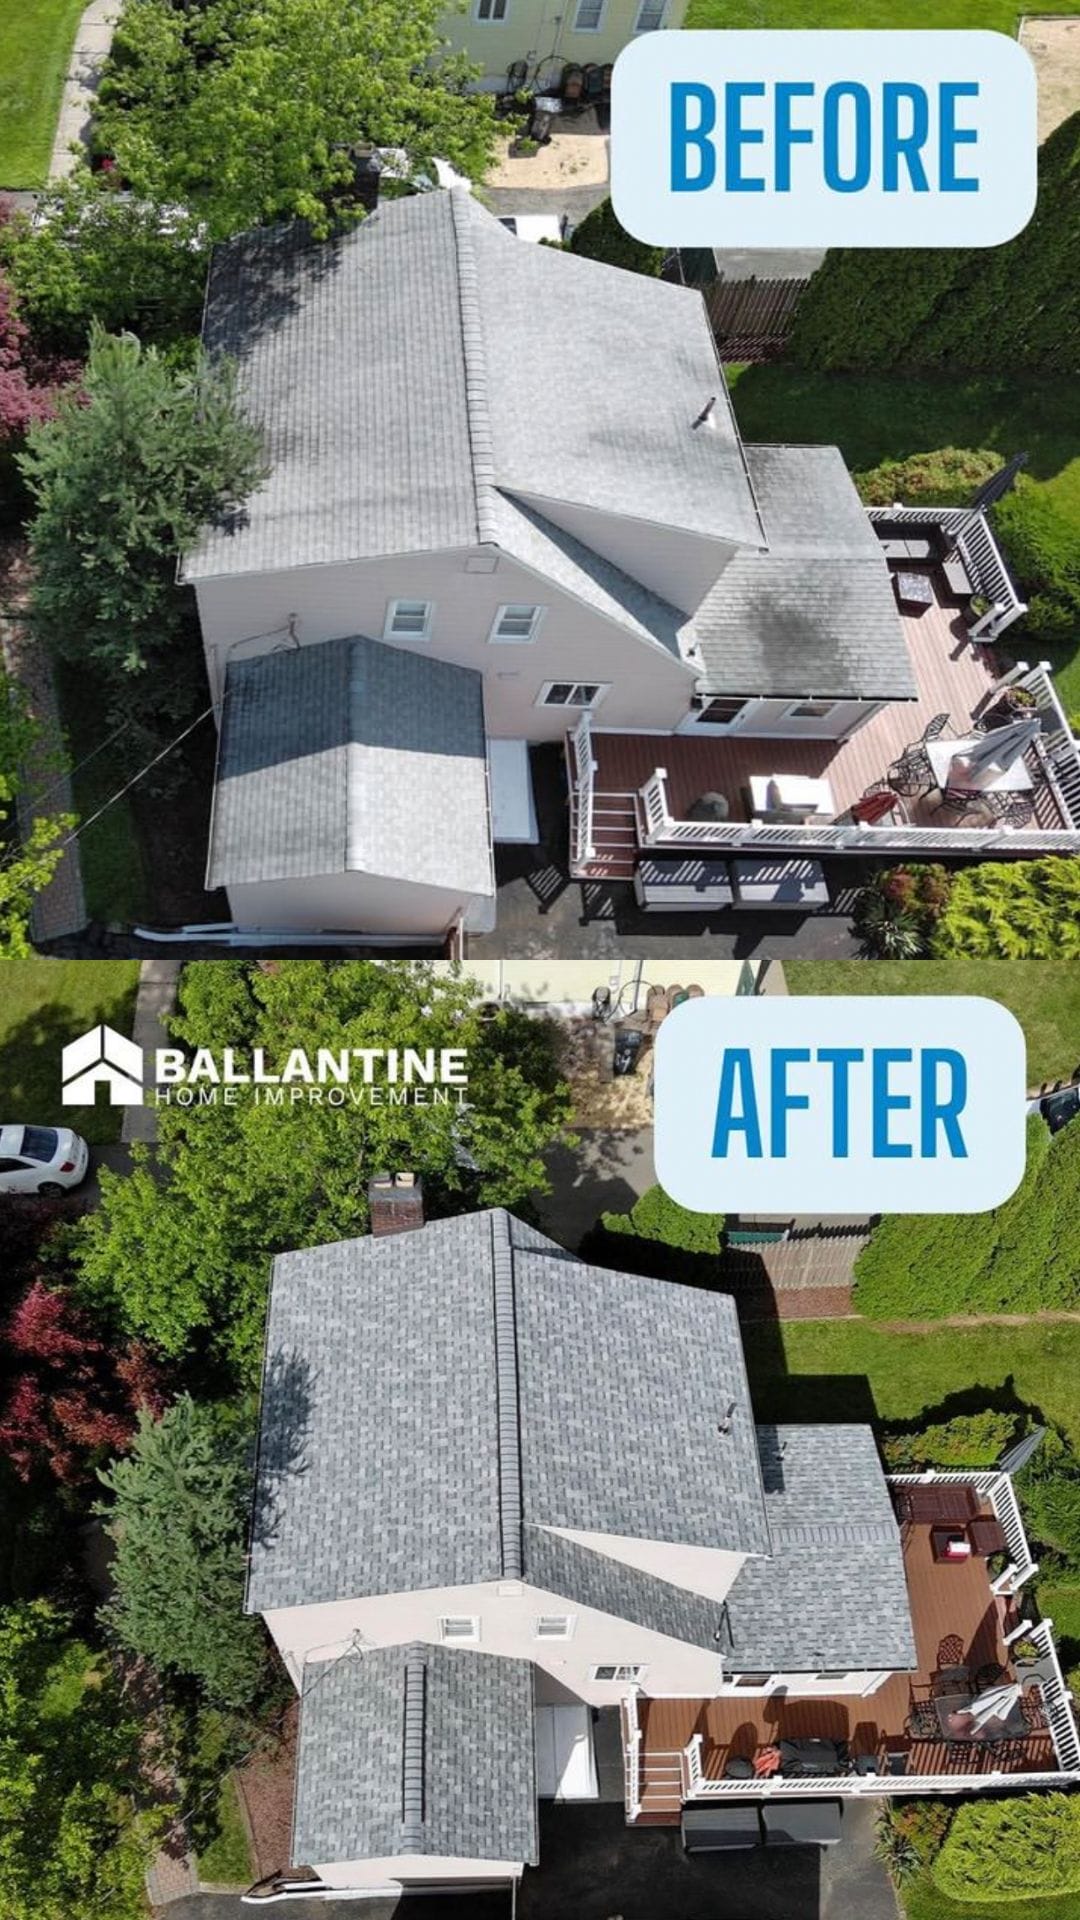 Before & After: Owens Corning Sierra Gray Shingles on a Home in Whippany, NJ